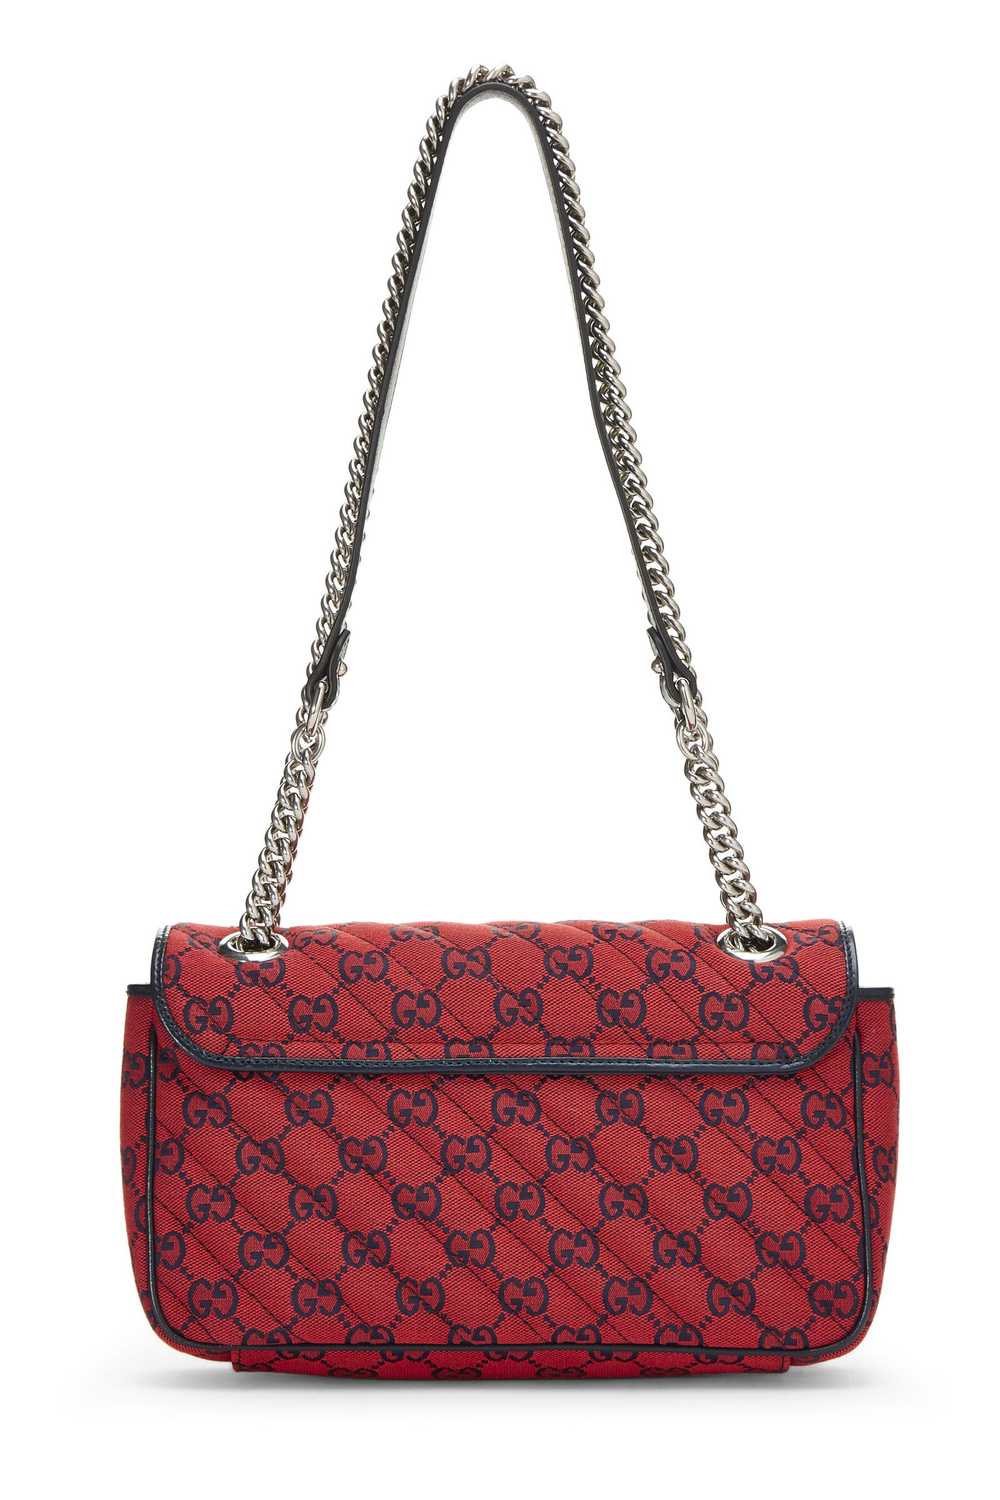 Red GG Canvas Marmont Shoulder Bag Small - image 4